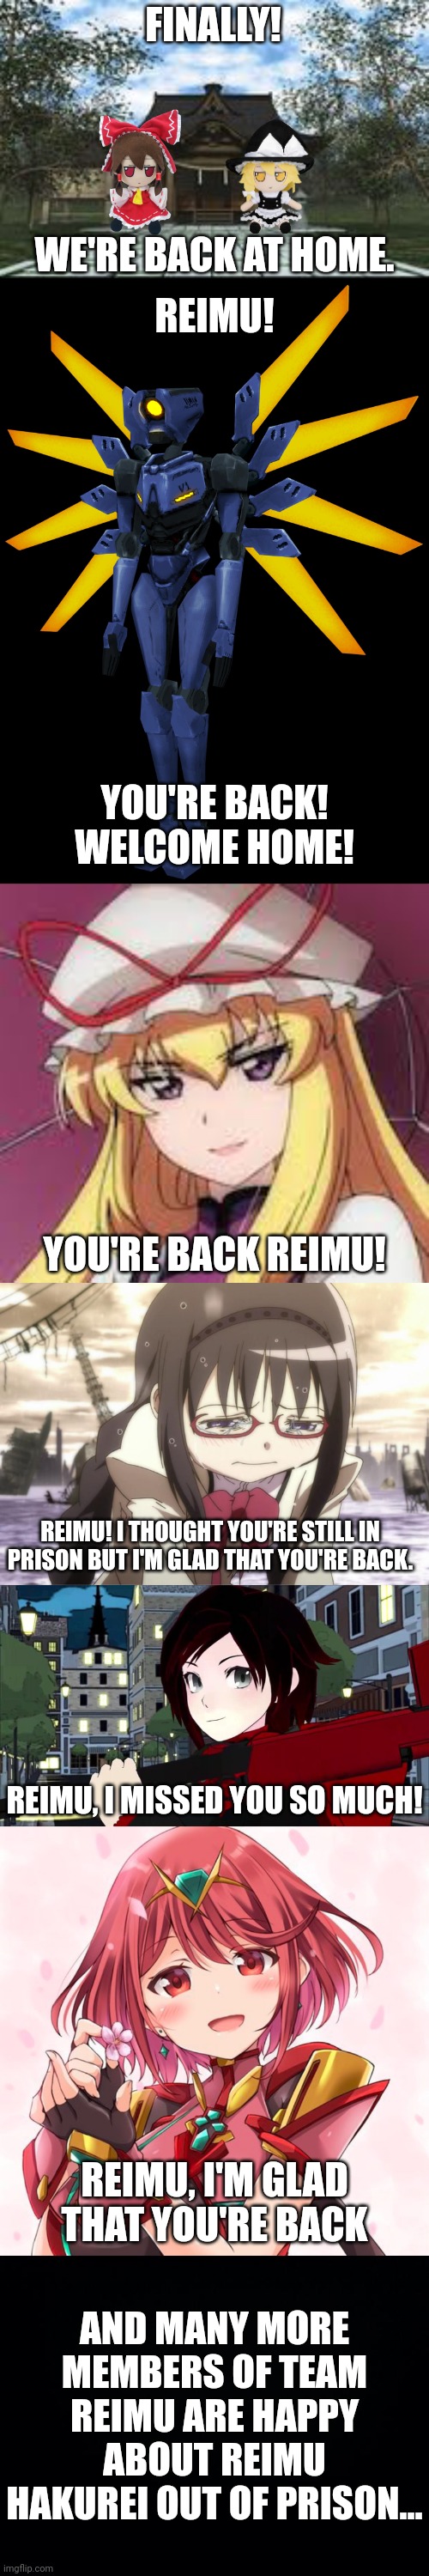 Reimu and Marisa are back | FINALLY! WE'RE BACK AT HOME. REIMU! YOU'RE BACK! WELCOME HOME! YOU'RE BACK REIMU! REIMU! I THOUGHT YOU'RE STILL IN PRISON BUT I'M GLAD THAT YOU'RE BACK. REIMU, I MISSED YOU SO MUCH! REIMU, I'M GLAD THAT YOU'RE BACK; AND MANY MORE MEMBERS OF TEAM REIMU ARE HAPPY ABOUT REIMU HAKUREI OUT OF PRISON... | image tagged in v1 ultrakill,homura akemi,black background | made w/ Imgflip meme maker